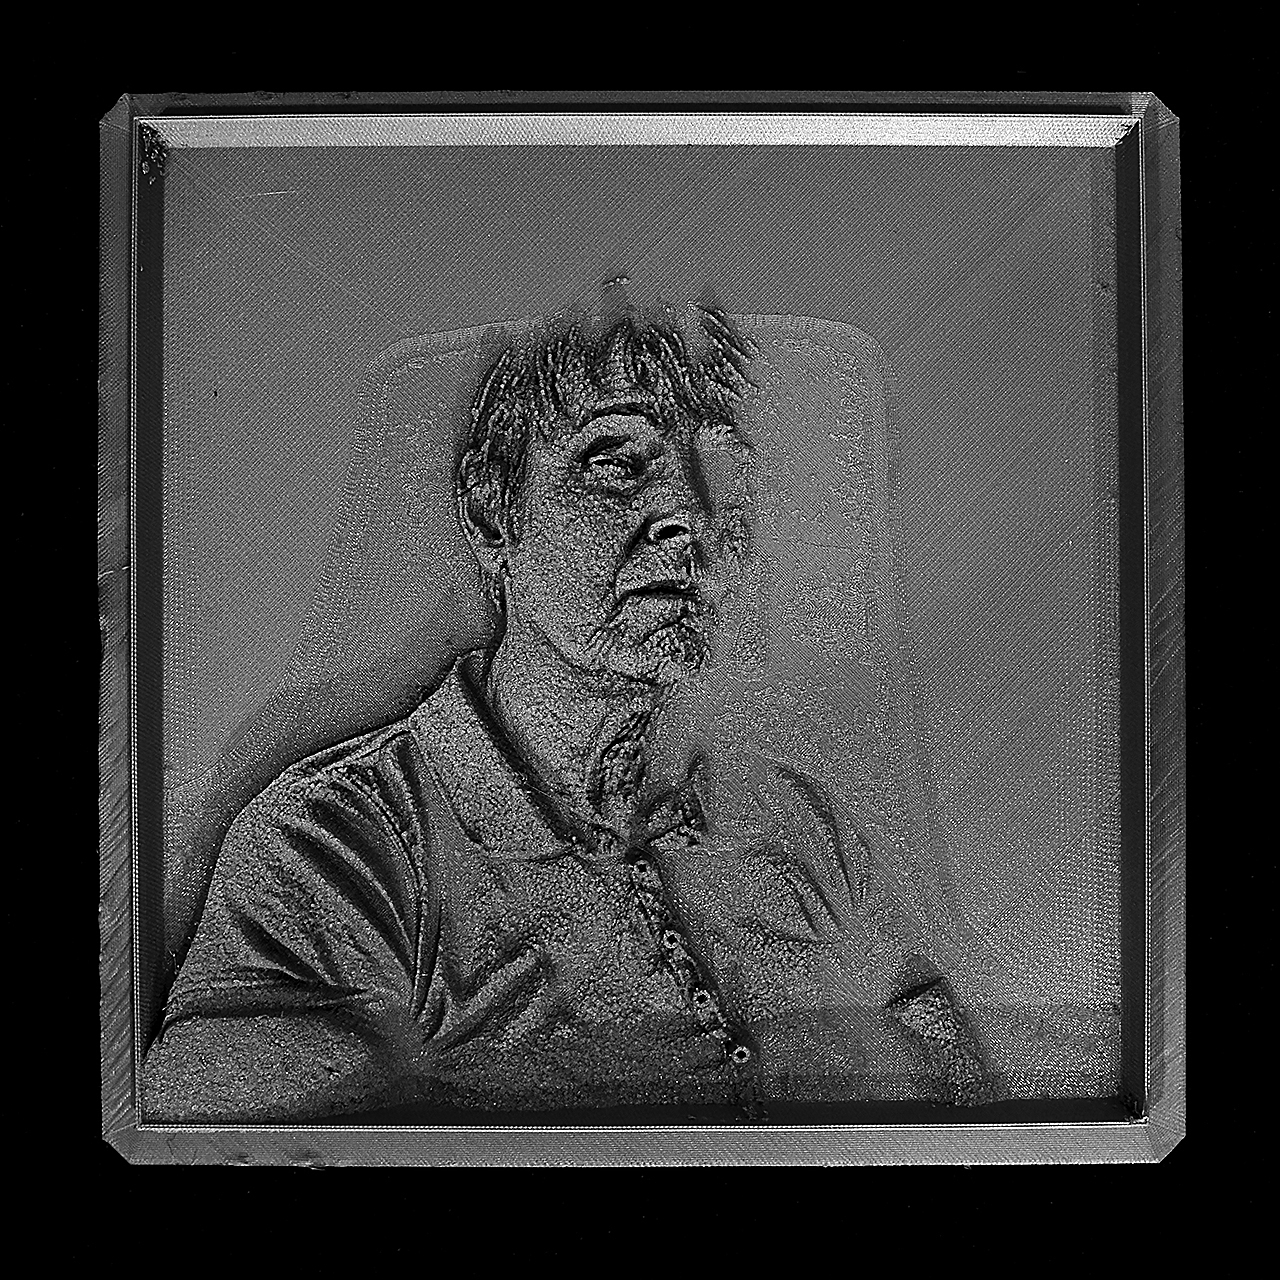 #03 - Portraits for the Visually Impaired, 3D Printed Relief